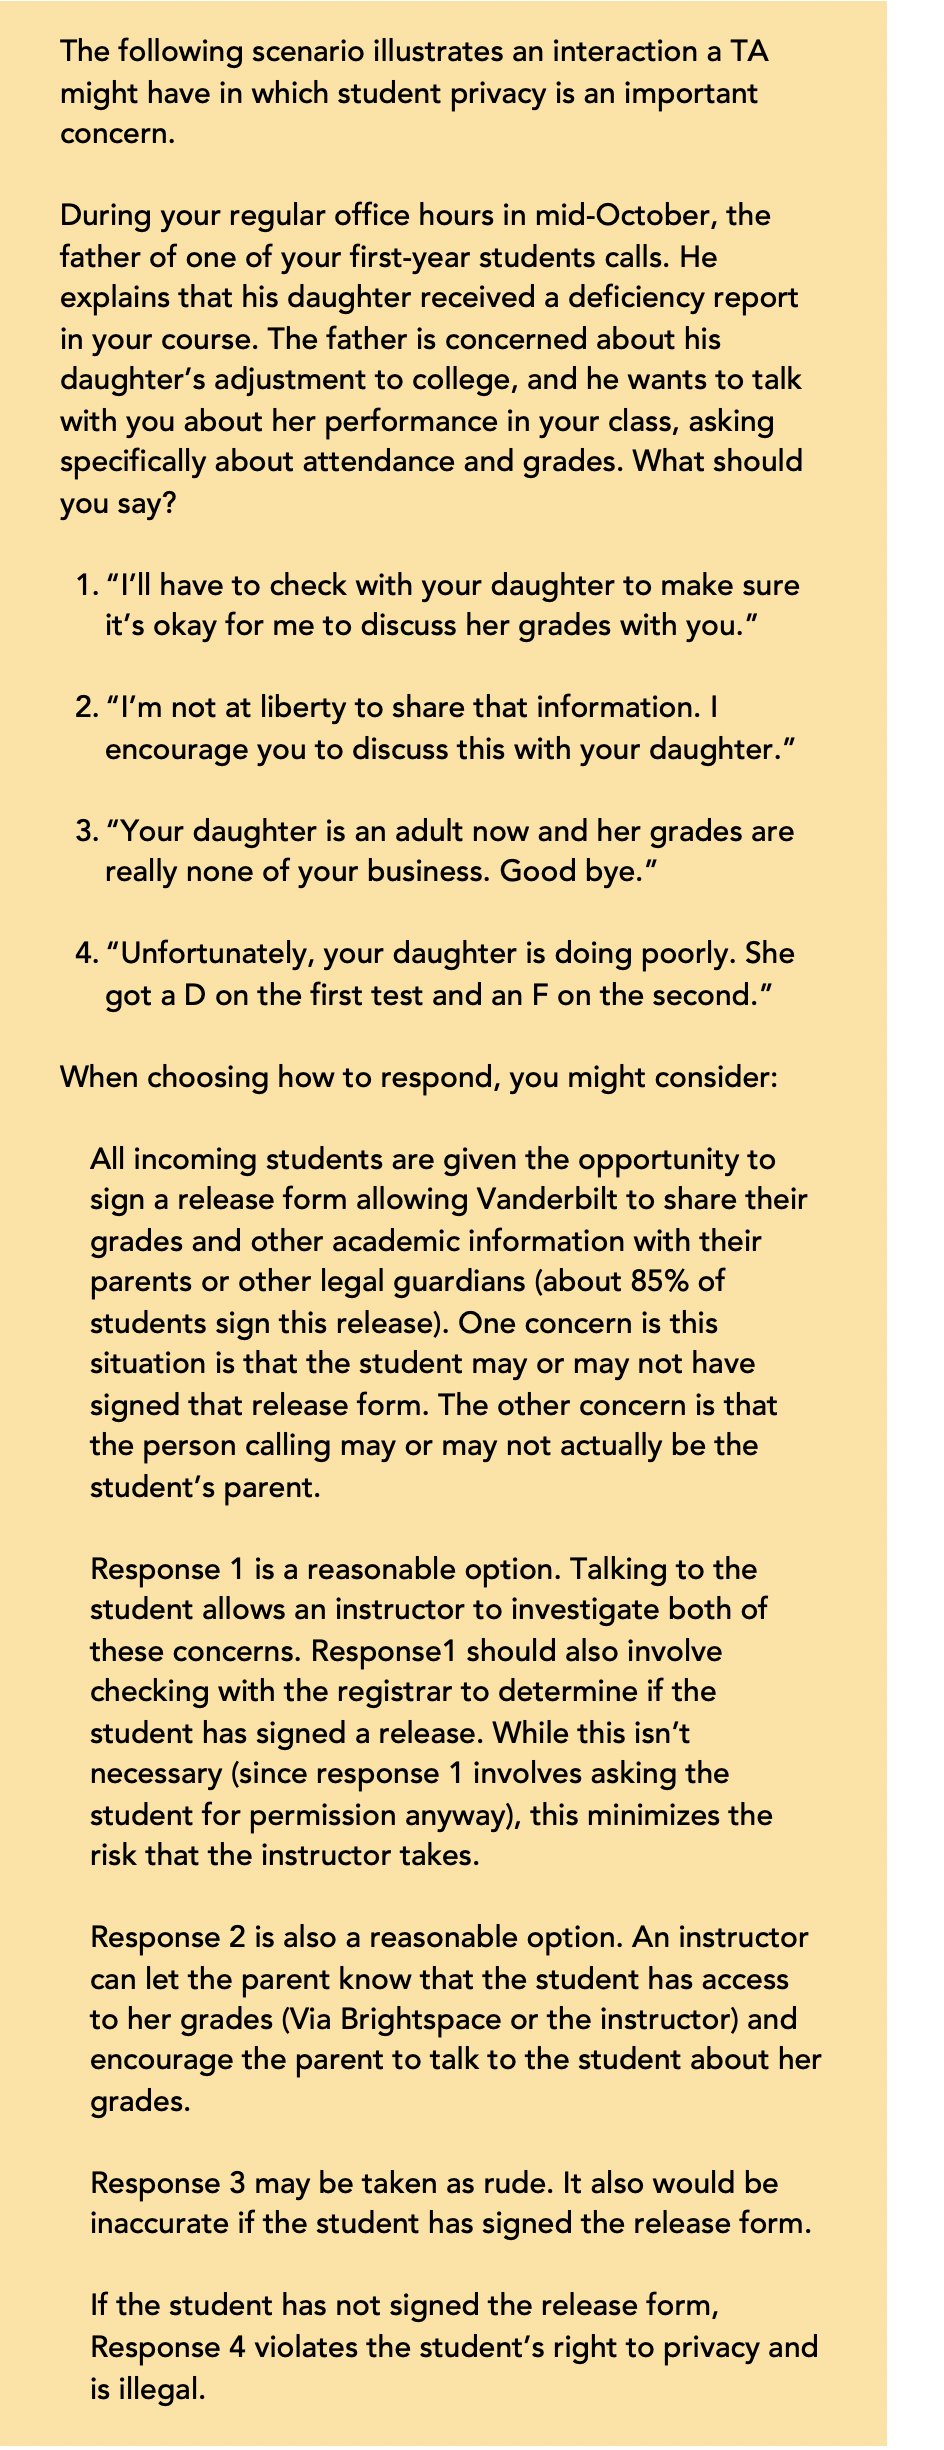 The following scenario illustrates an interaction a TA might have in which student privacy is an important concern. During your regular office hours in mid-October, the father of one of your first-year students calls. He explains that his daughter received a deficiency report in your course. The father is concerned about his daughter’s adjustment to college, and he wants to talk with you about her performance in your class, asking specifically about attendance and grades. What should you say? 1. “I’ll have to check with your daughter to make sure it’s okay for me to discuss her grades with you.” 2. “I’m not at liberty to share that information. I encourage you to discuss this with your daughter.” 3. “Your daughter is an adult now and her grades are really none of your business. Good bye.” 4. “Unfortunately, your daughter is doing poorly. She got a D on the first test and an F on the second.” When choosing how to respond, you might consider: All incoming students are given the opportunity to sign a release form allowing Vanderbilt to share their grades and other academic information with their parents or other legal guardians (about 85% of students sign this release). One concern is this situation is that the student may or may not have signed that release form. The other concern is that the person calling may or may not actually be the student’s parent. Response 1 is a reasonable option. Talking to the student allows an instructor to investigate both of these concerns. Response1 should also involve checking with the registrar to determine if the student has signed a release. While this isn’t necessary (since response 1 involves asking the student for permission anyway), this minimizes the risk that the instructor takes. Response 2 is also a reasonable option. An instructor can let the parent know that the student has access to her grades (Via Brightspace or the instructor) and encourage the parent to talk to the student about her grades. Response 3 may be taken as rude. It also would be inaccurate if the student has signed the release form. If the student has not signed the release form, Response 4 violates the student’s right to privacy and is illegal.